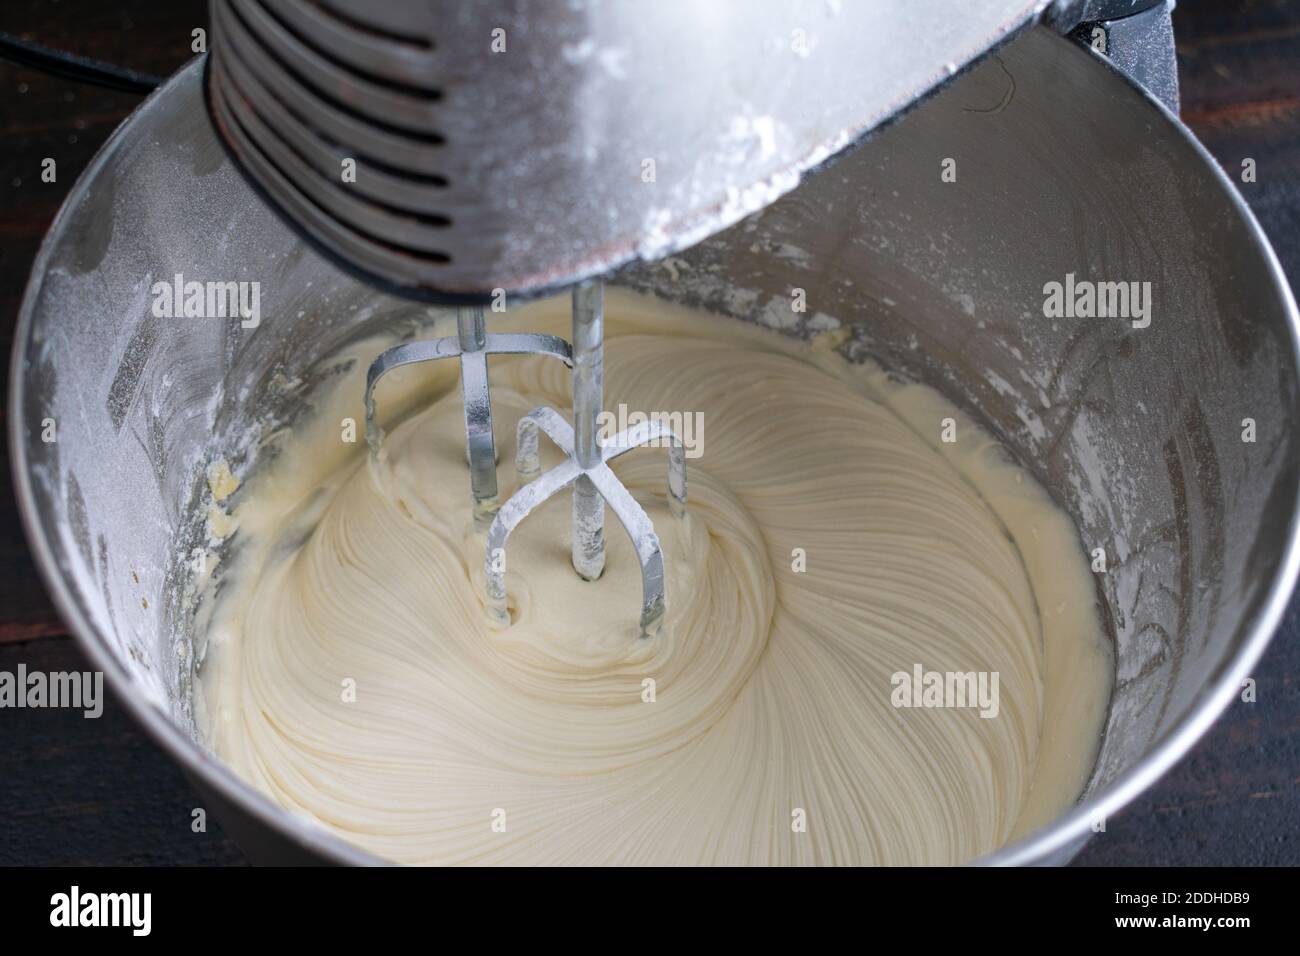 Making White Chocolate Frosting in a Stand Mixer: Beating butter, sugar, and vanilla to make white chocolate icing Stock Photo